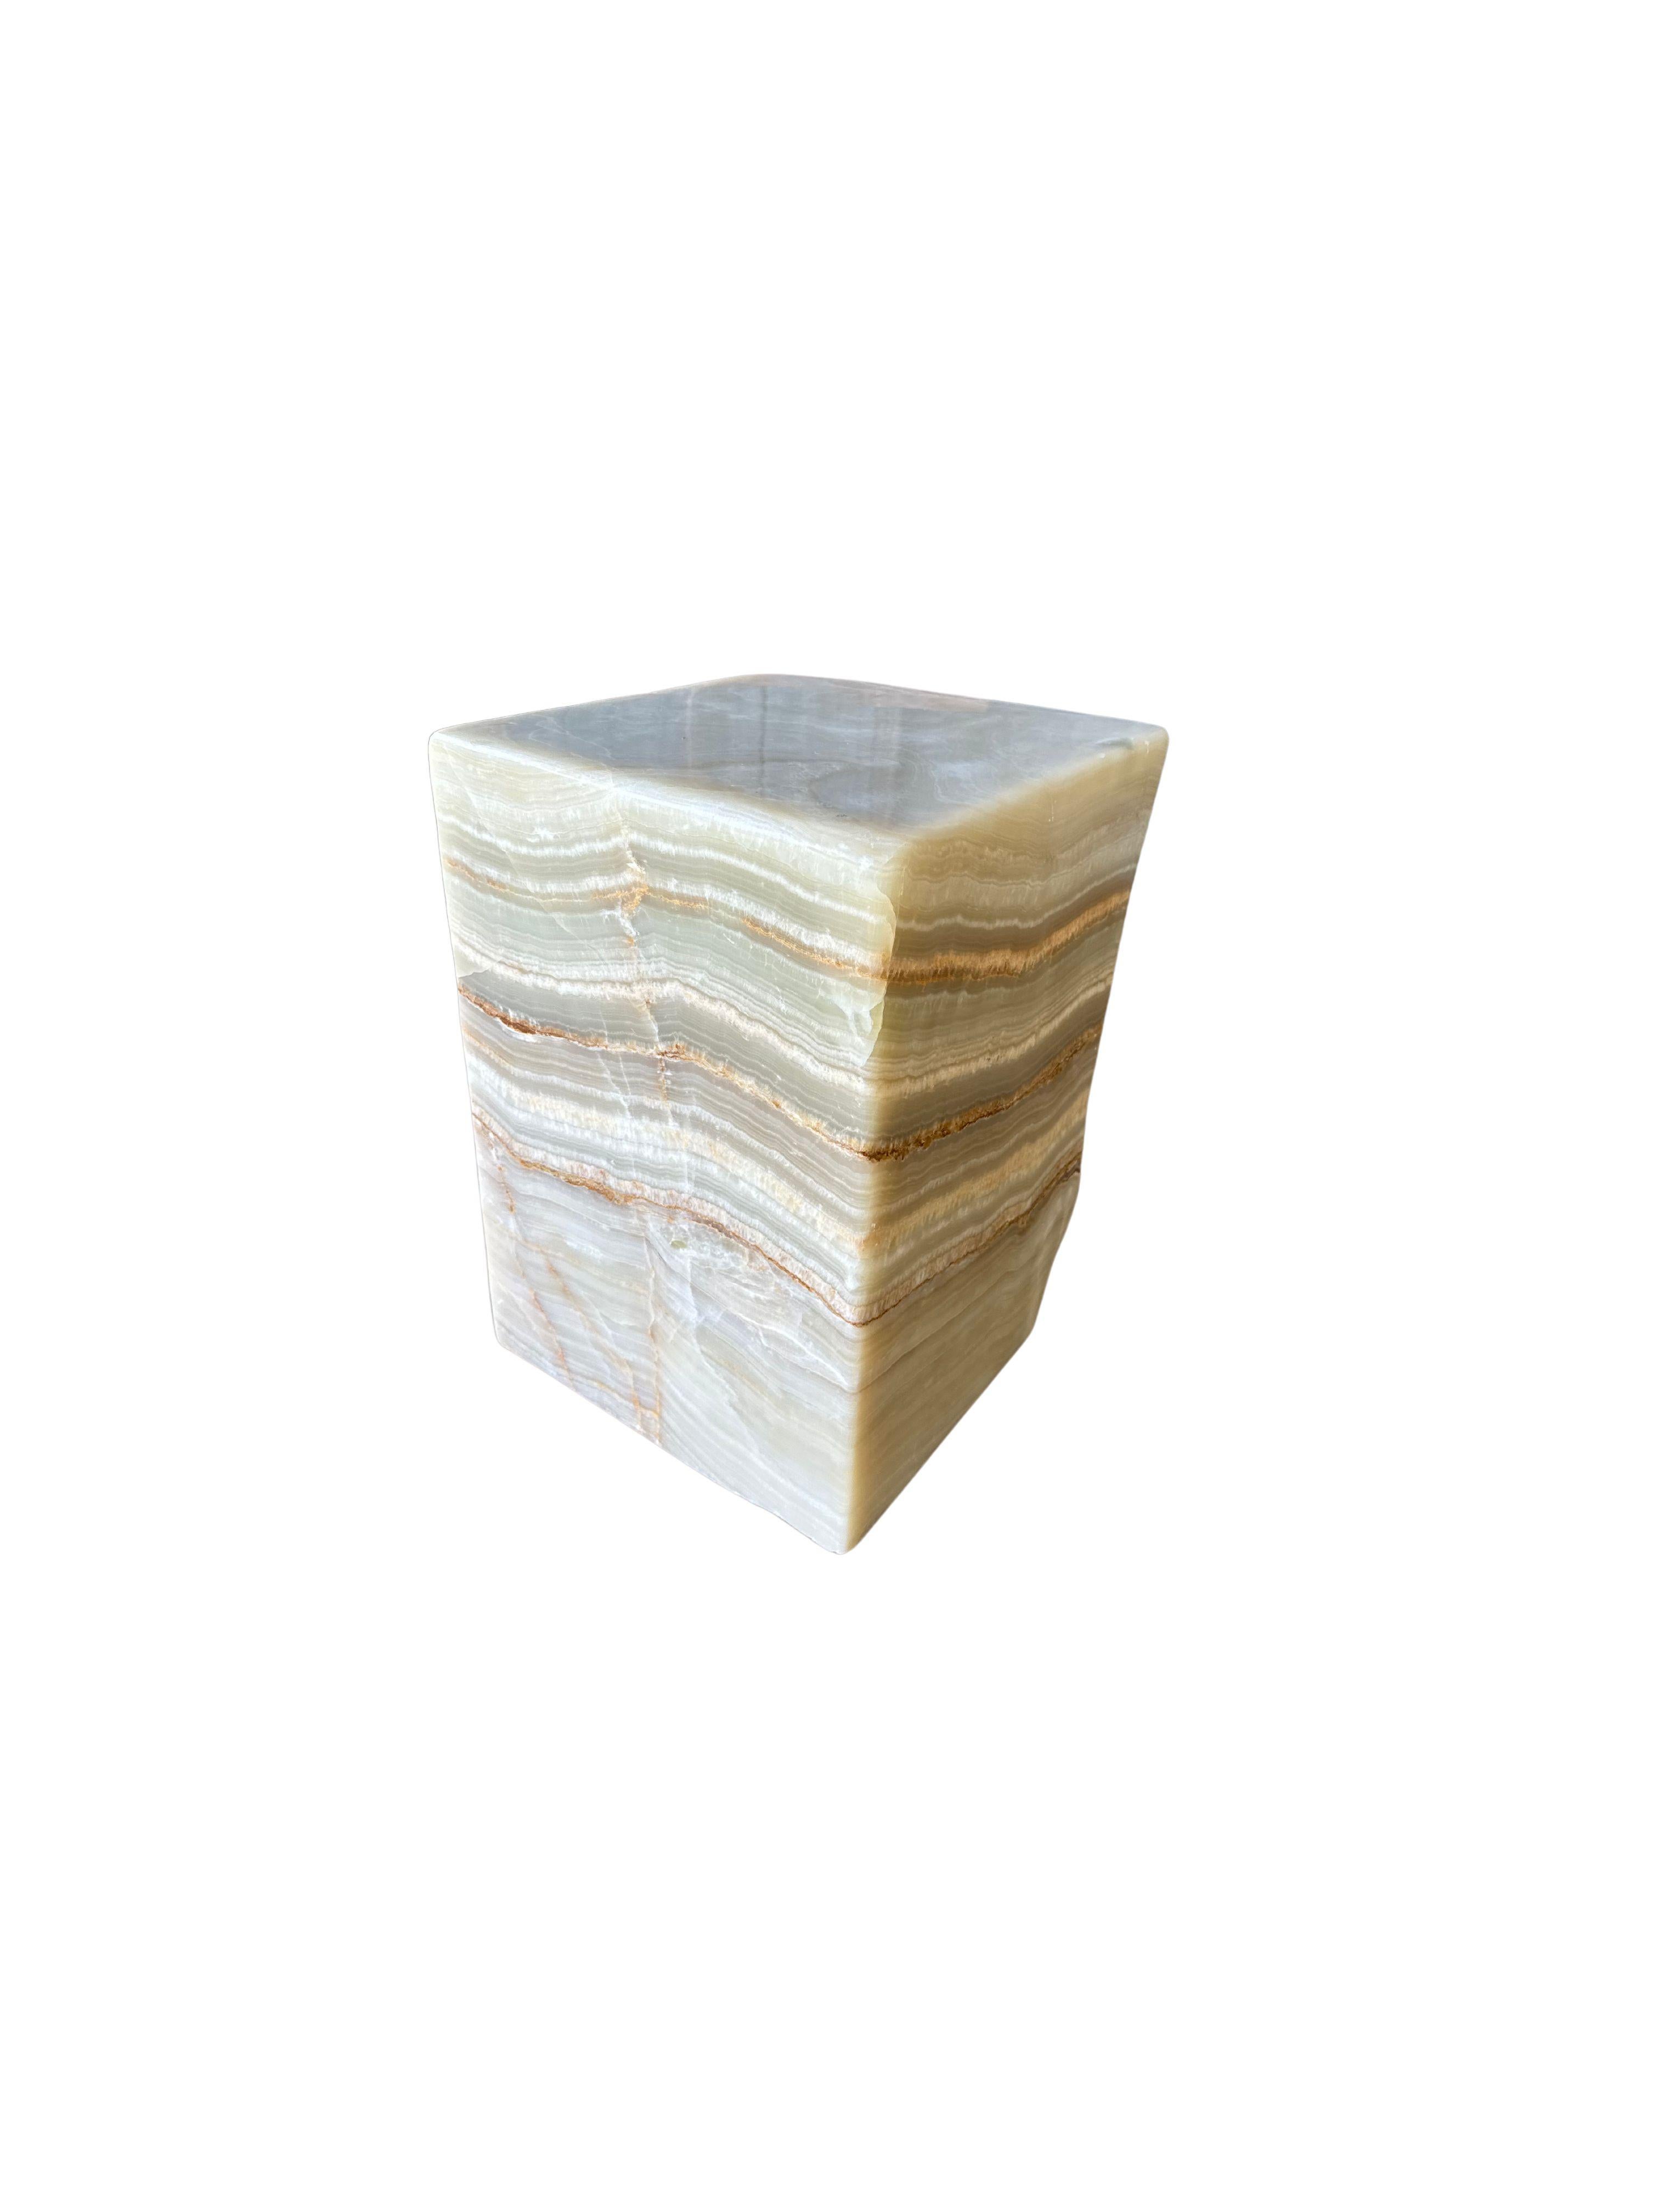 Jupiter Onyx Marble Side Table with Stunning Textures, Modern Organic For Sale 4